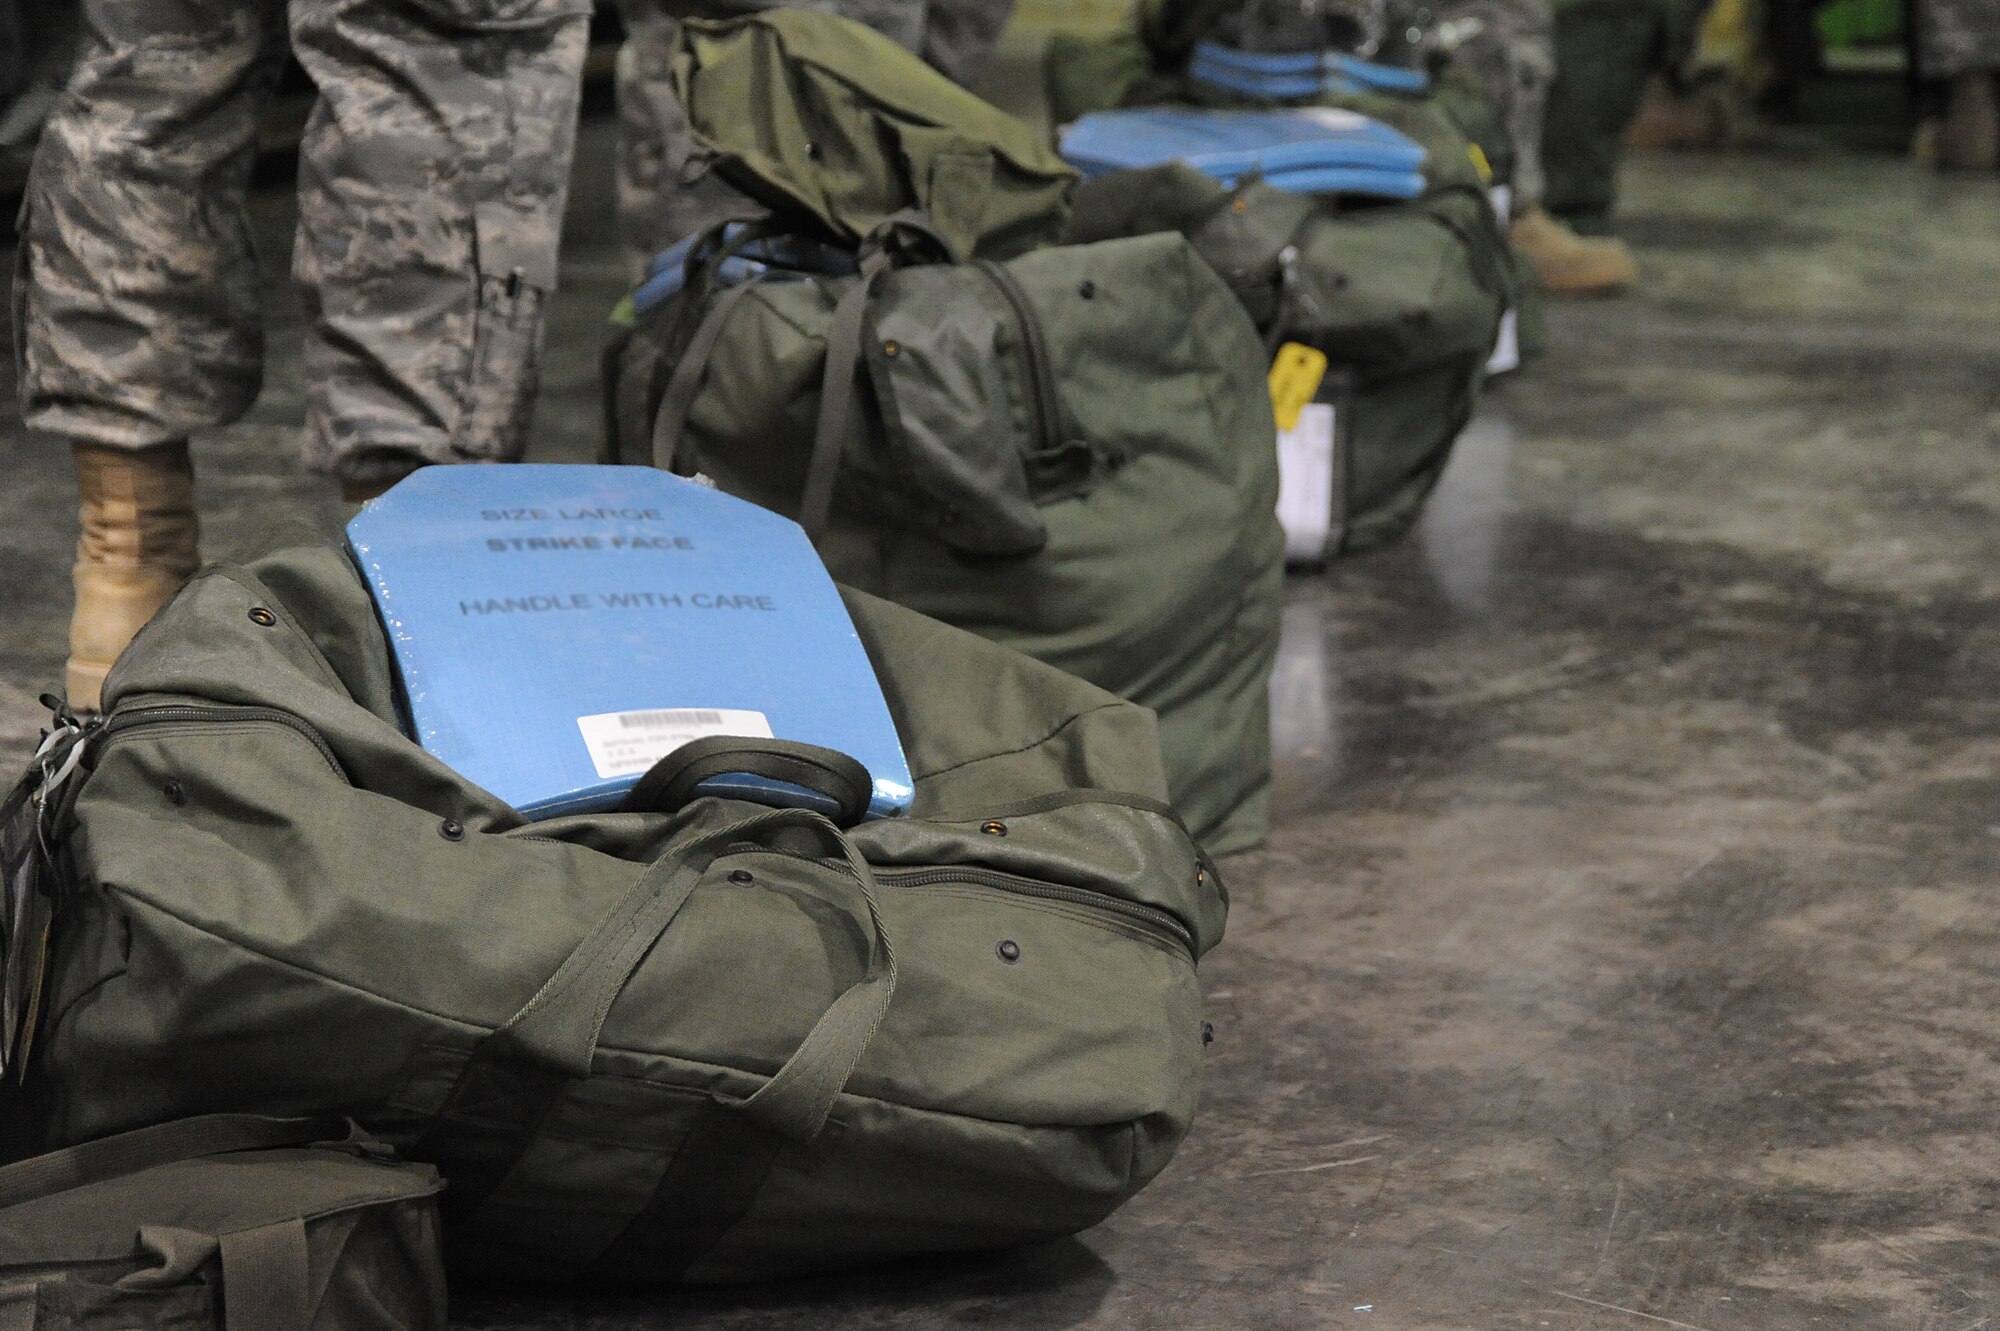 Airmen of the 380th Air Expeditionary Wing stand by their mobility bags as they process through a deployment line during a readiness exercise, April 21 at undisclosed location in Southwest Asia. The 380th ELRS ran the exercise to test the timeliness and capability for redeployment of Airmen. (U.S. Air Force photo by Senior Airman Brian J. Ellis) (Released)